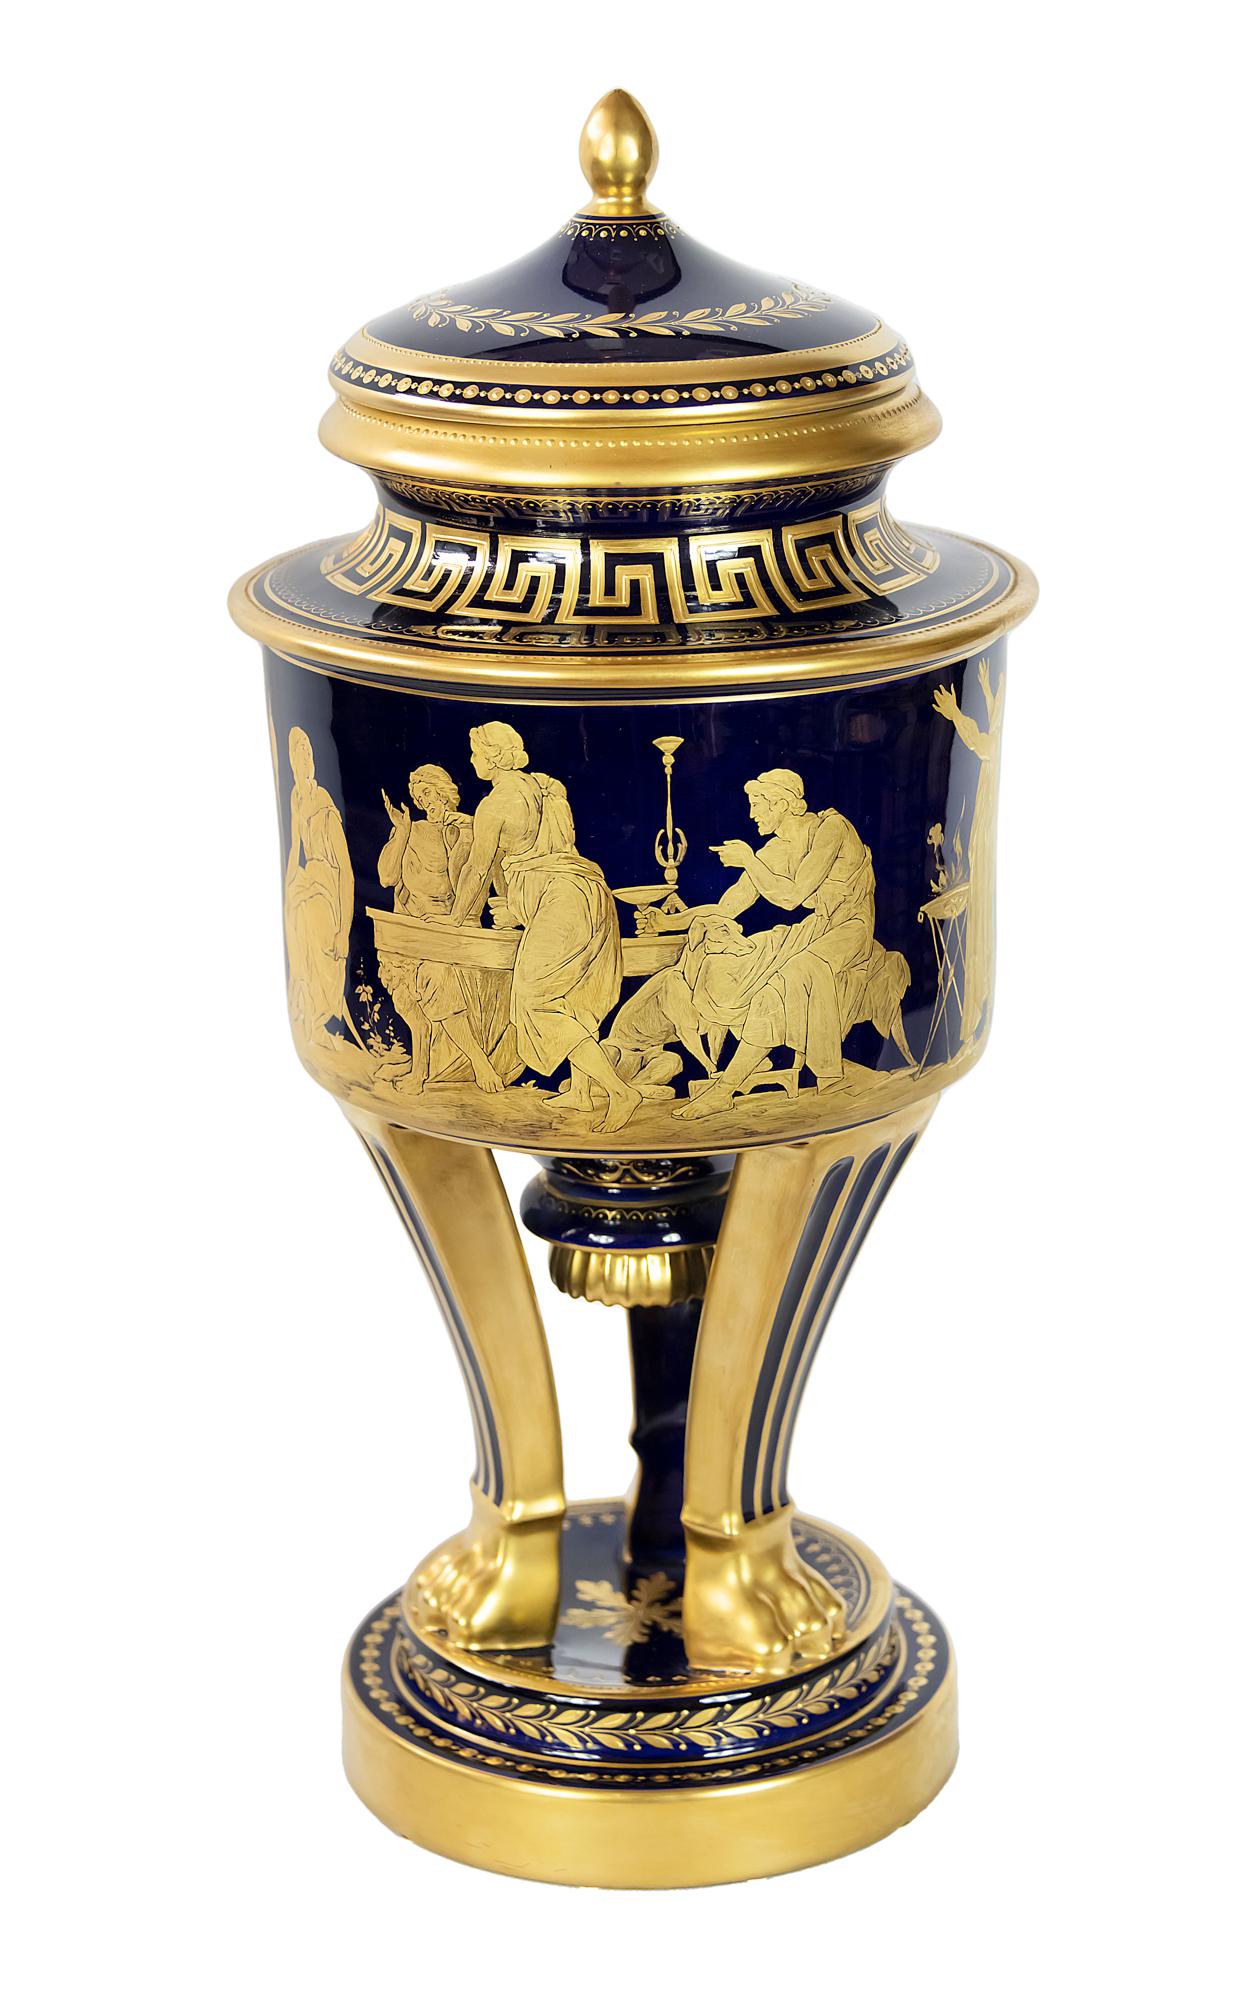 Large german Hutschenreuther porcelain empire style cobalt blue lidded vase hand painted in gold decor.
Decorated with mythological scenes.
Marks on the bottom and the lid 